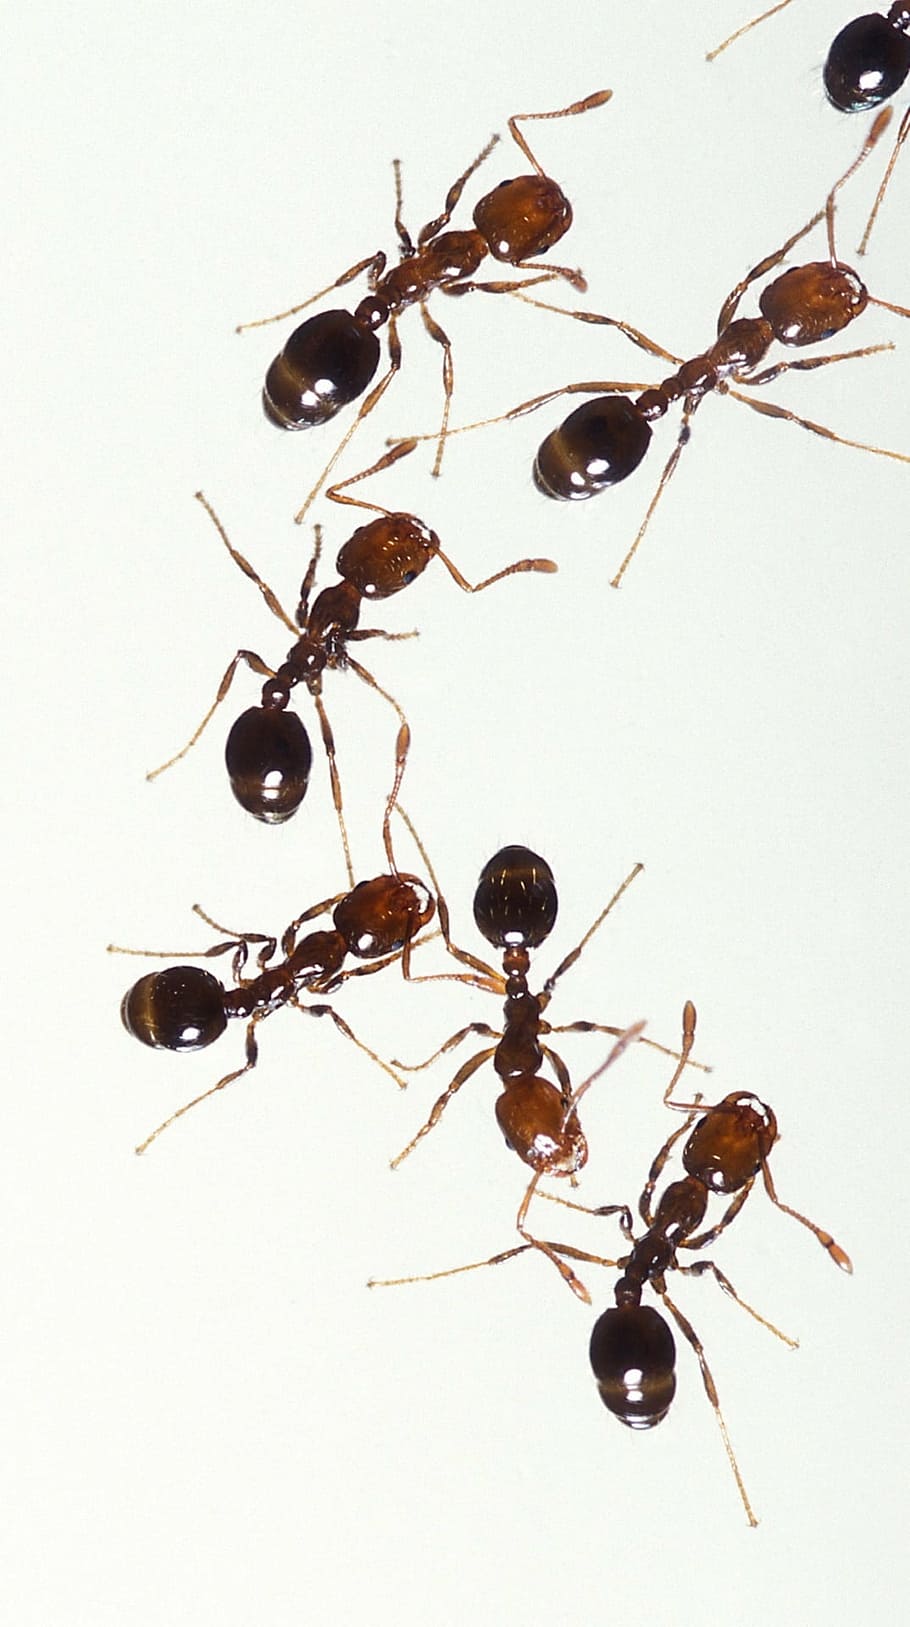 brown ants lot, fire ants, insects, worker, pest, macro, sting, painful, teamwork, group